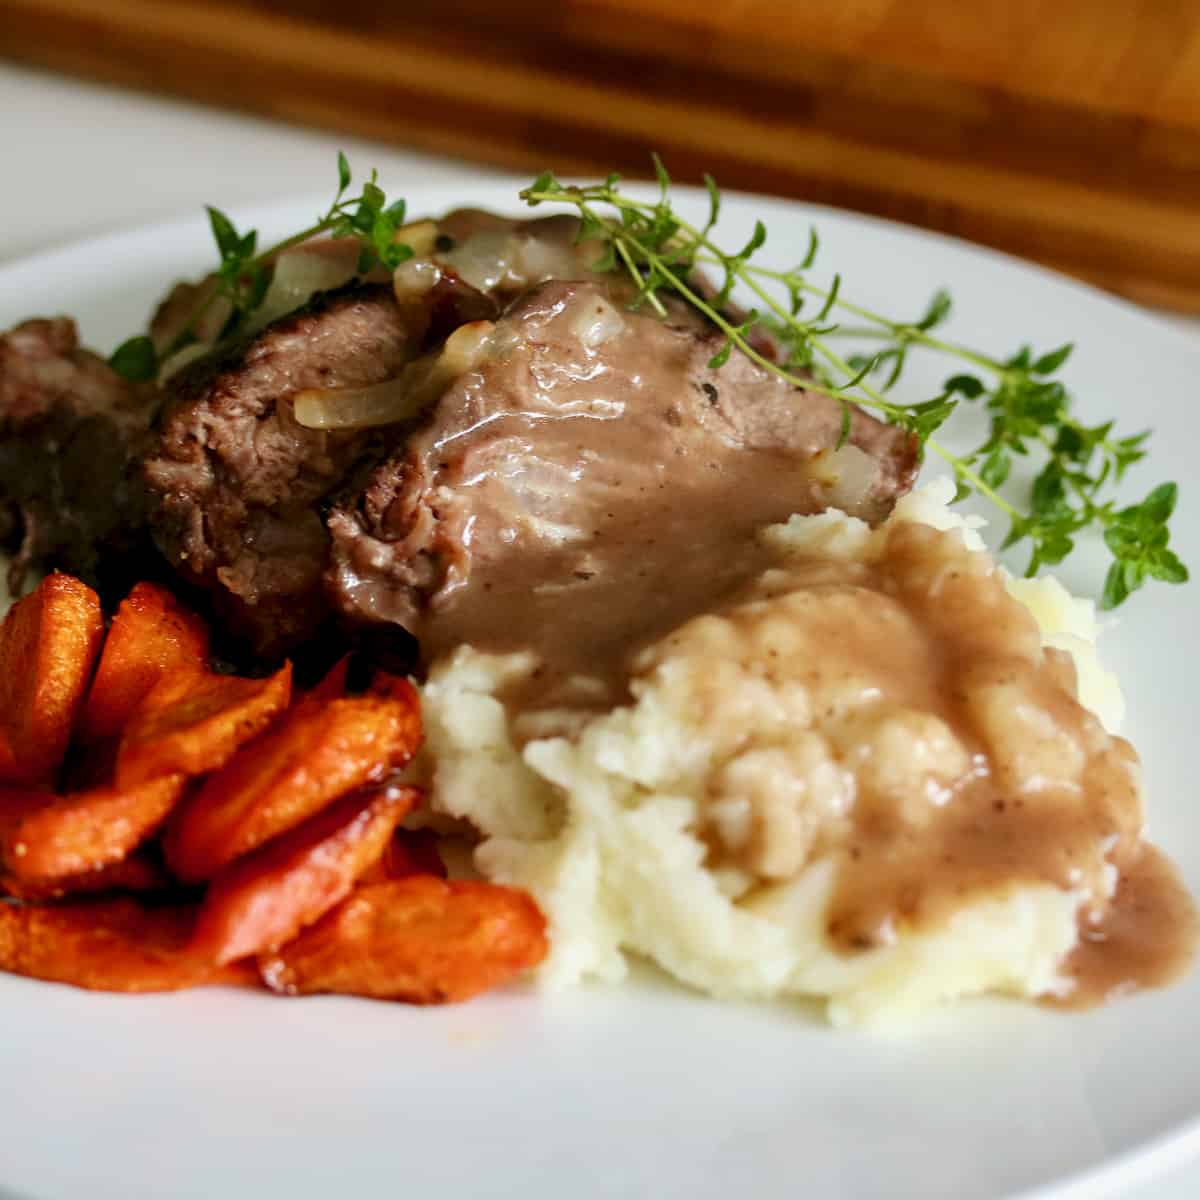 Sous vide pot roast with gravy, mashed potatoes and carrots.